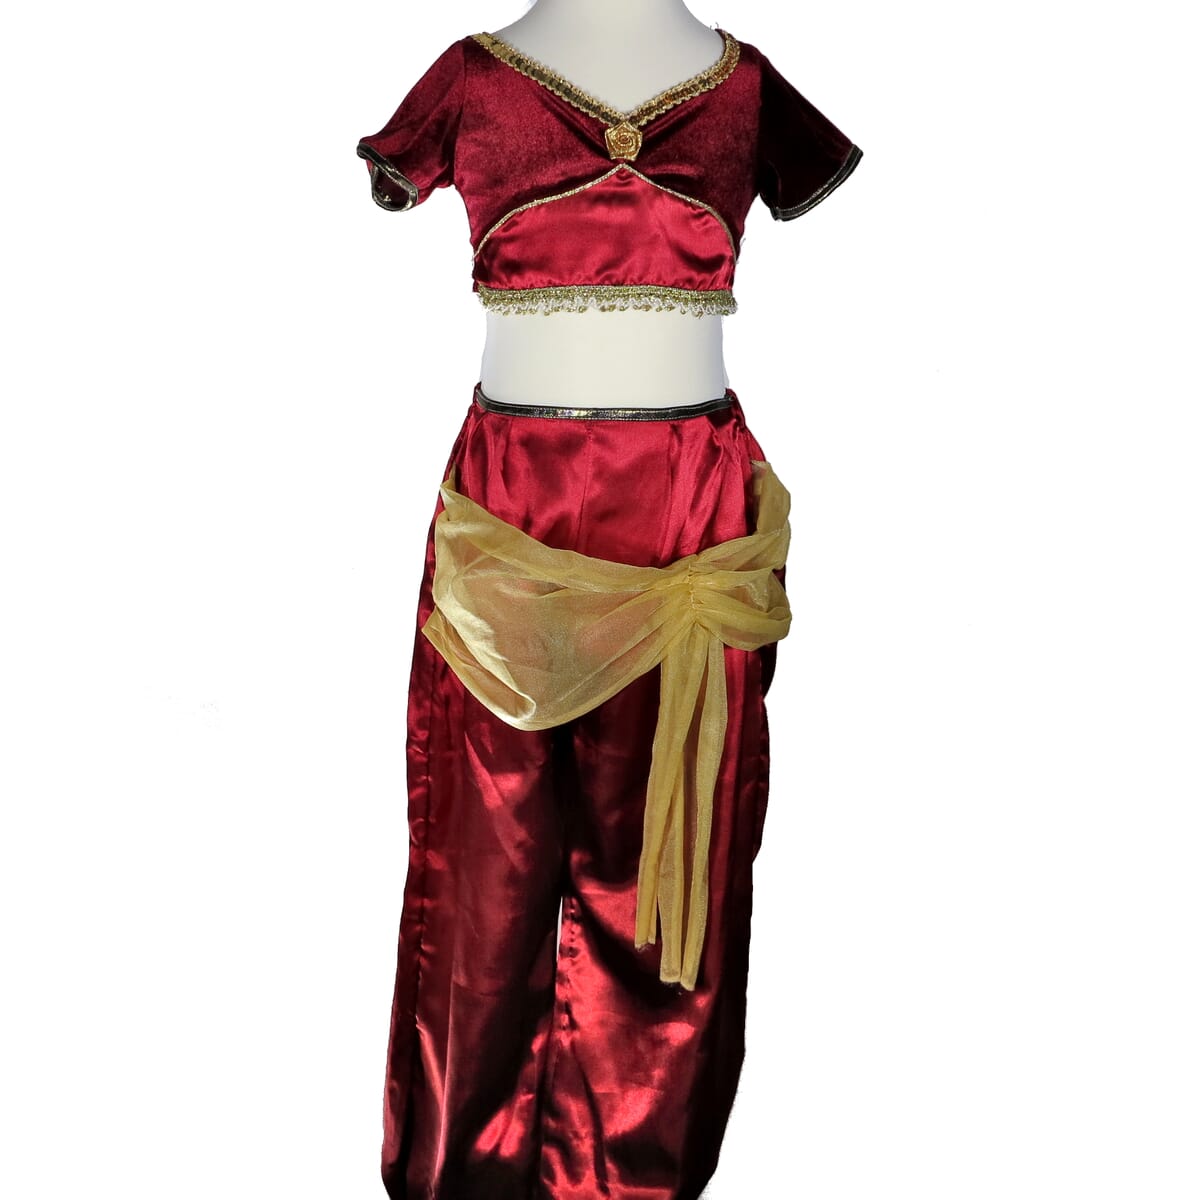 Hire Eastern Intrigue from Costume Source | Theme dance costume for hire